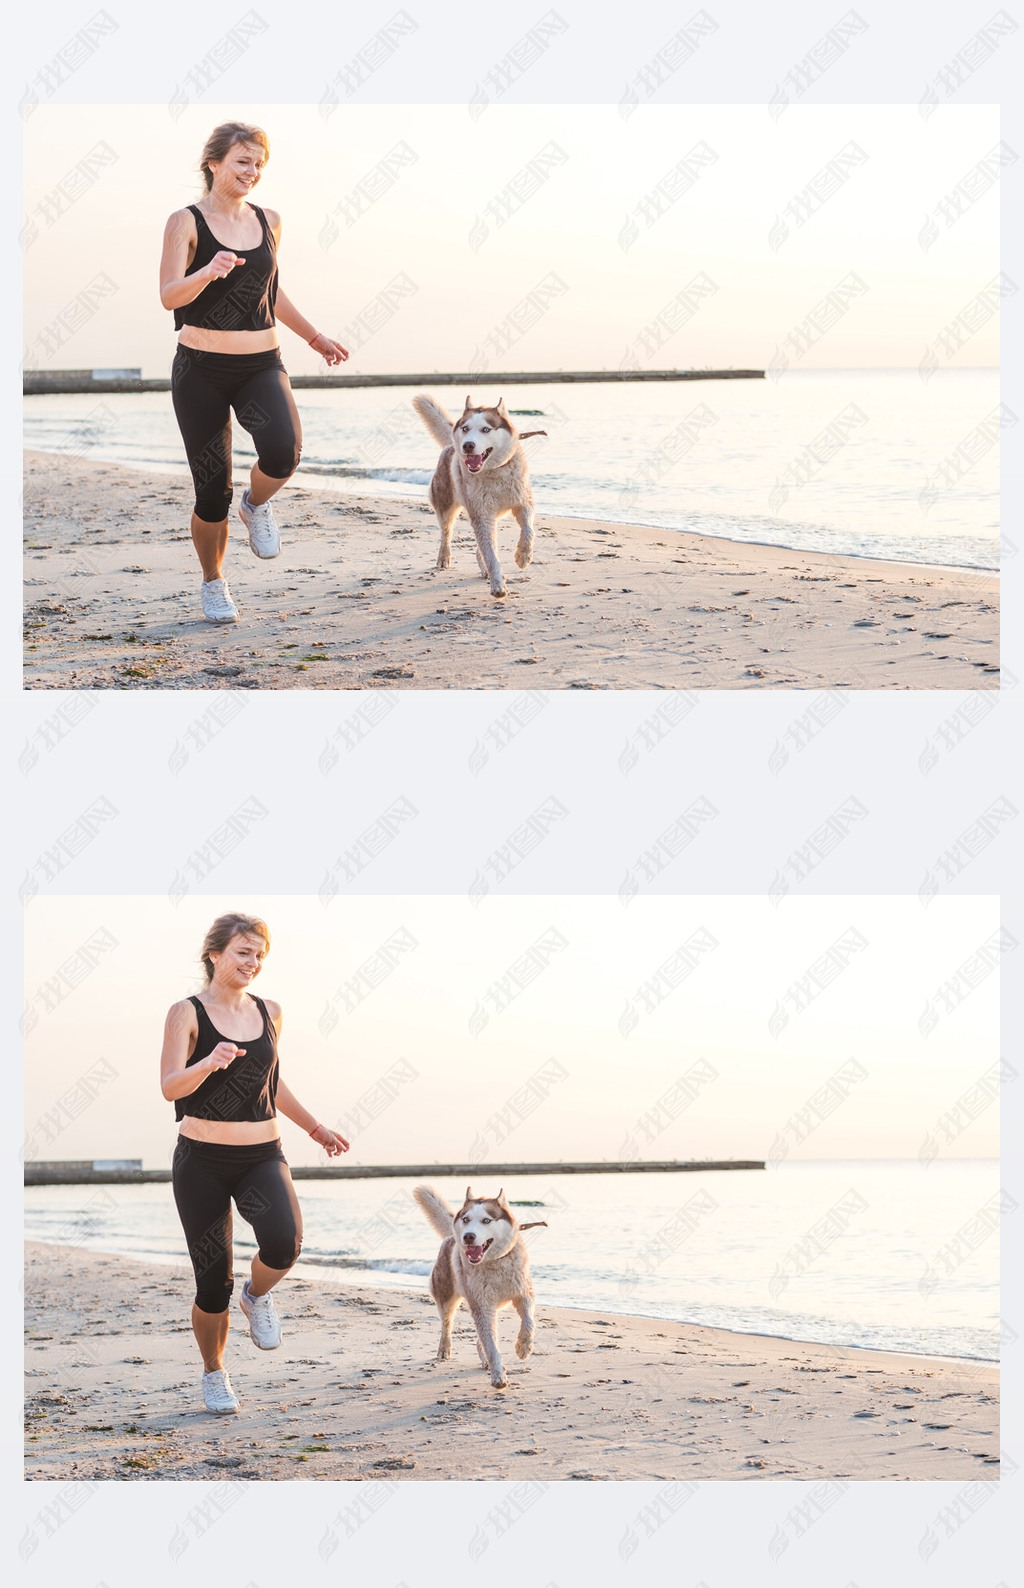 young caucasian female playing with siberian husky dog on beach during sunrise